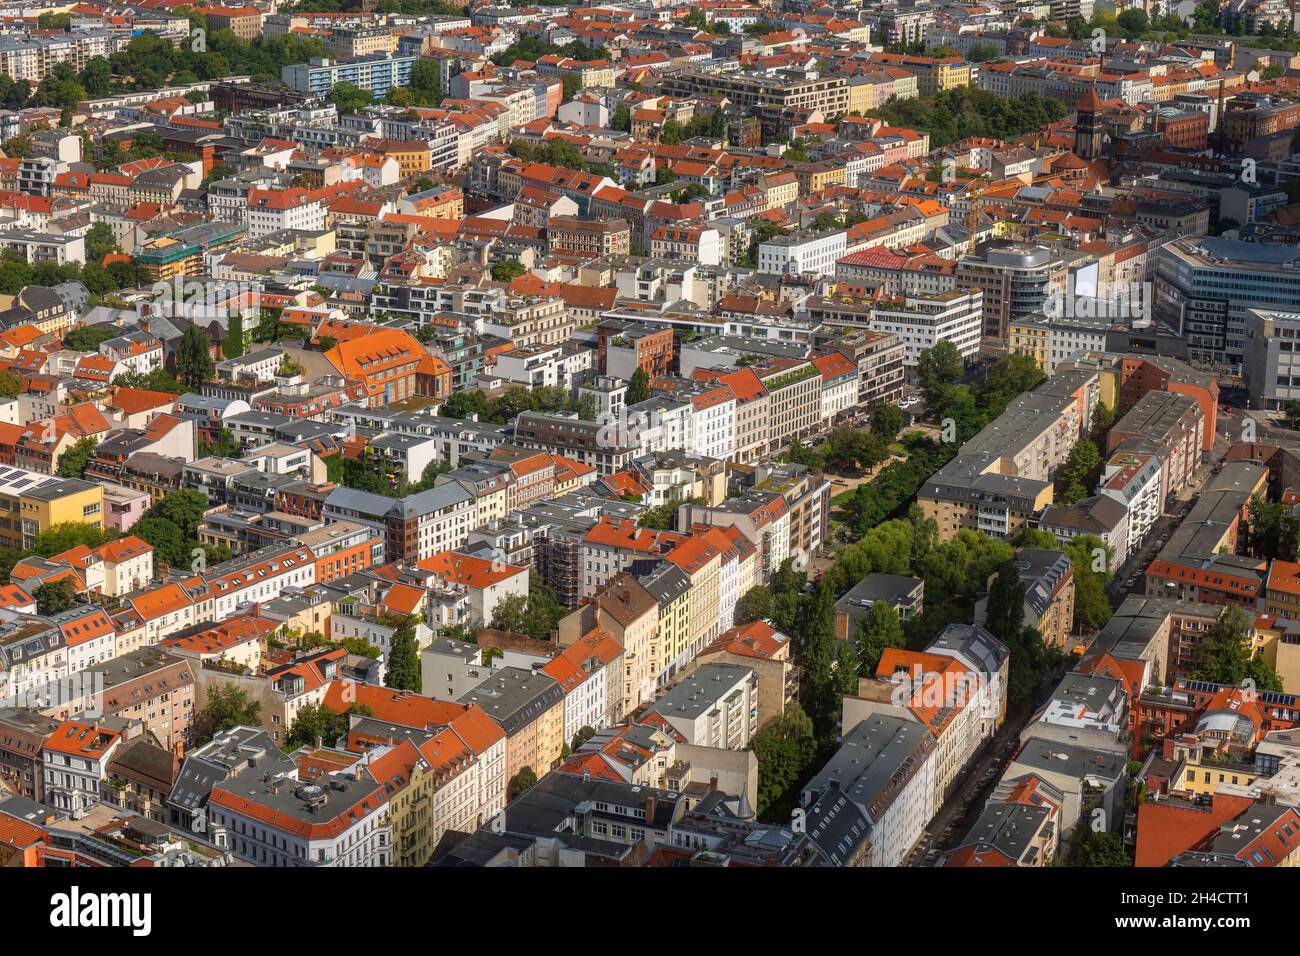 City of Berlin, capital of Germany, aerial view cityscape. Stock Photo